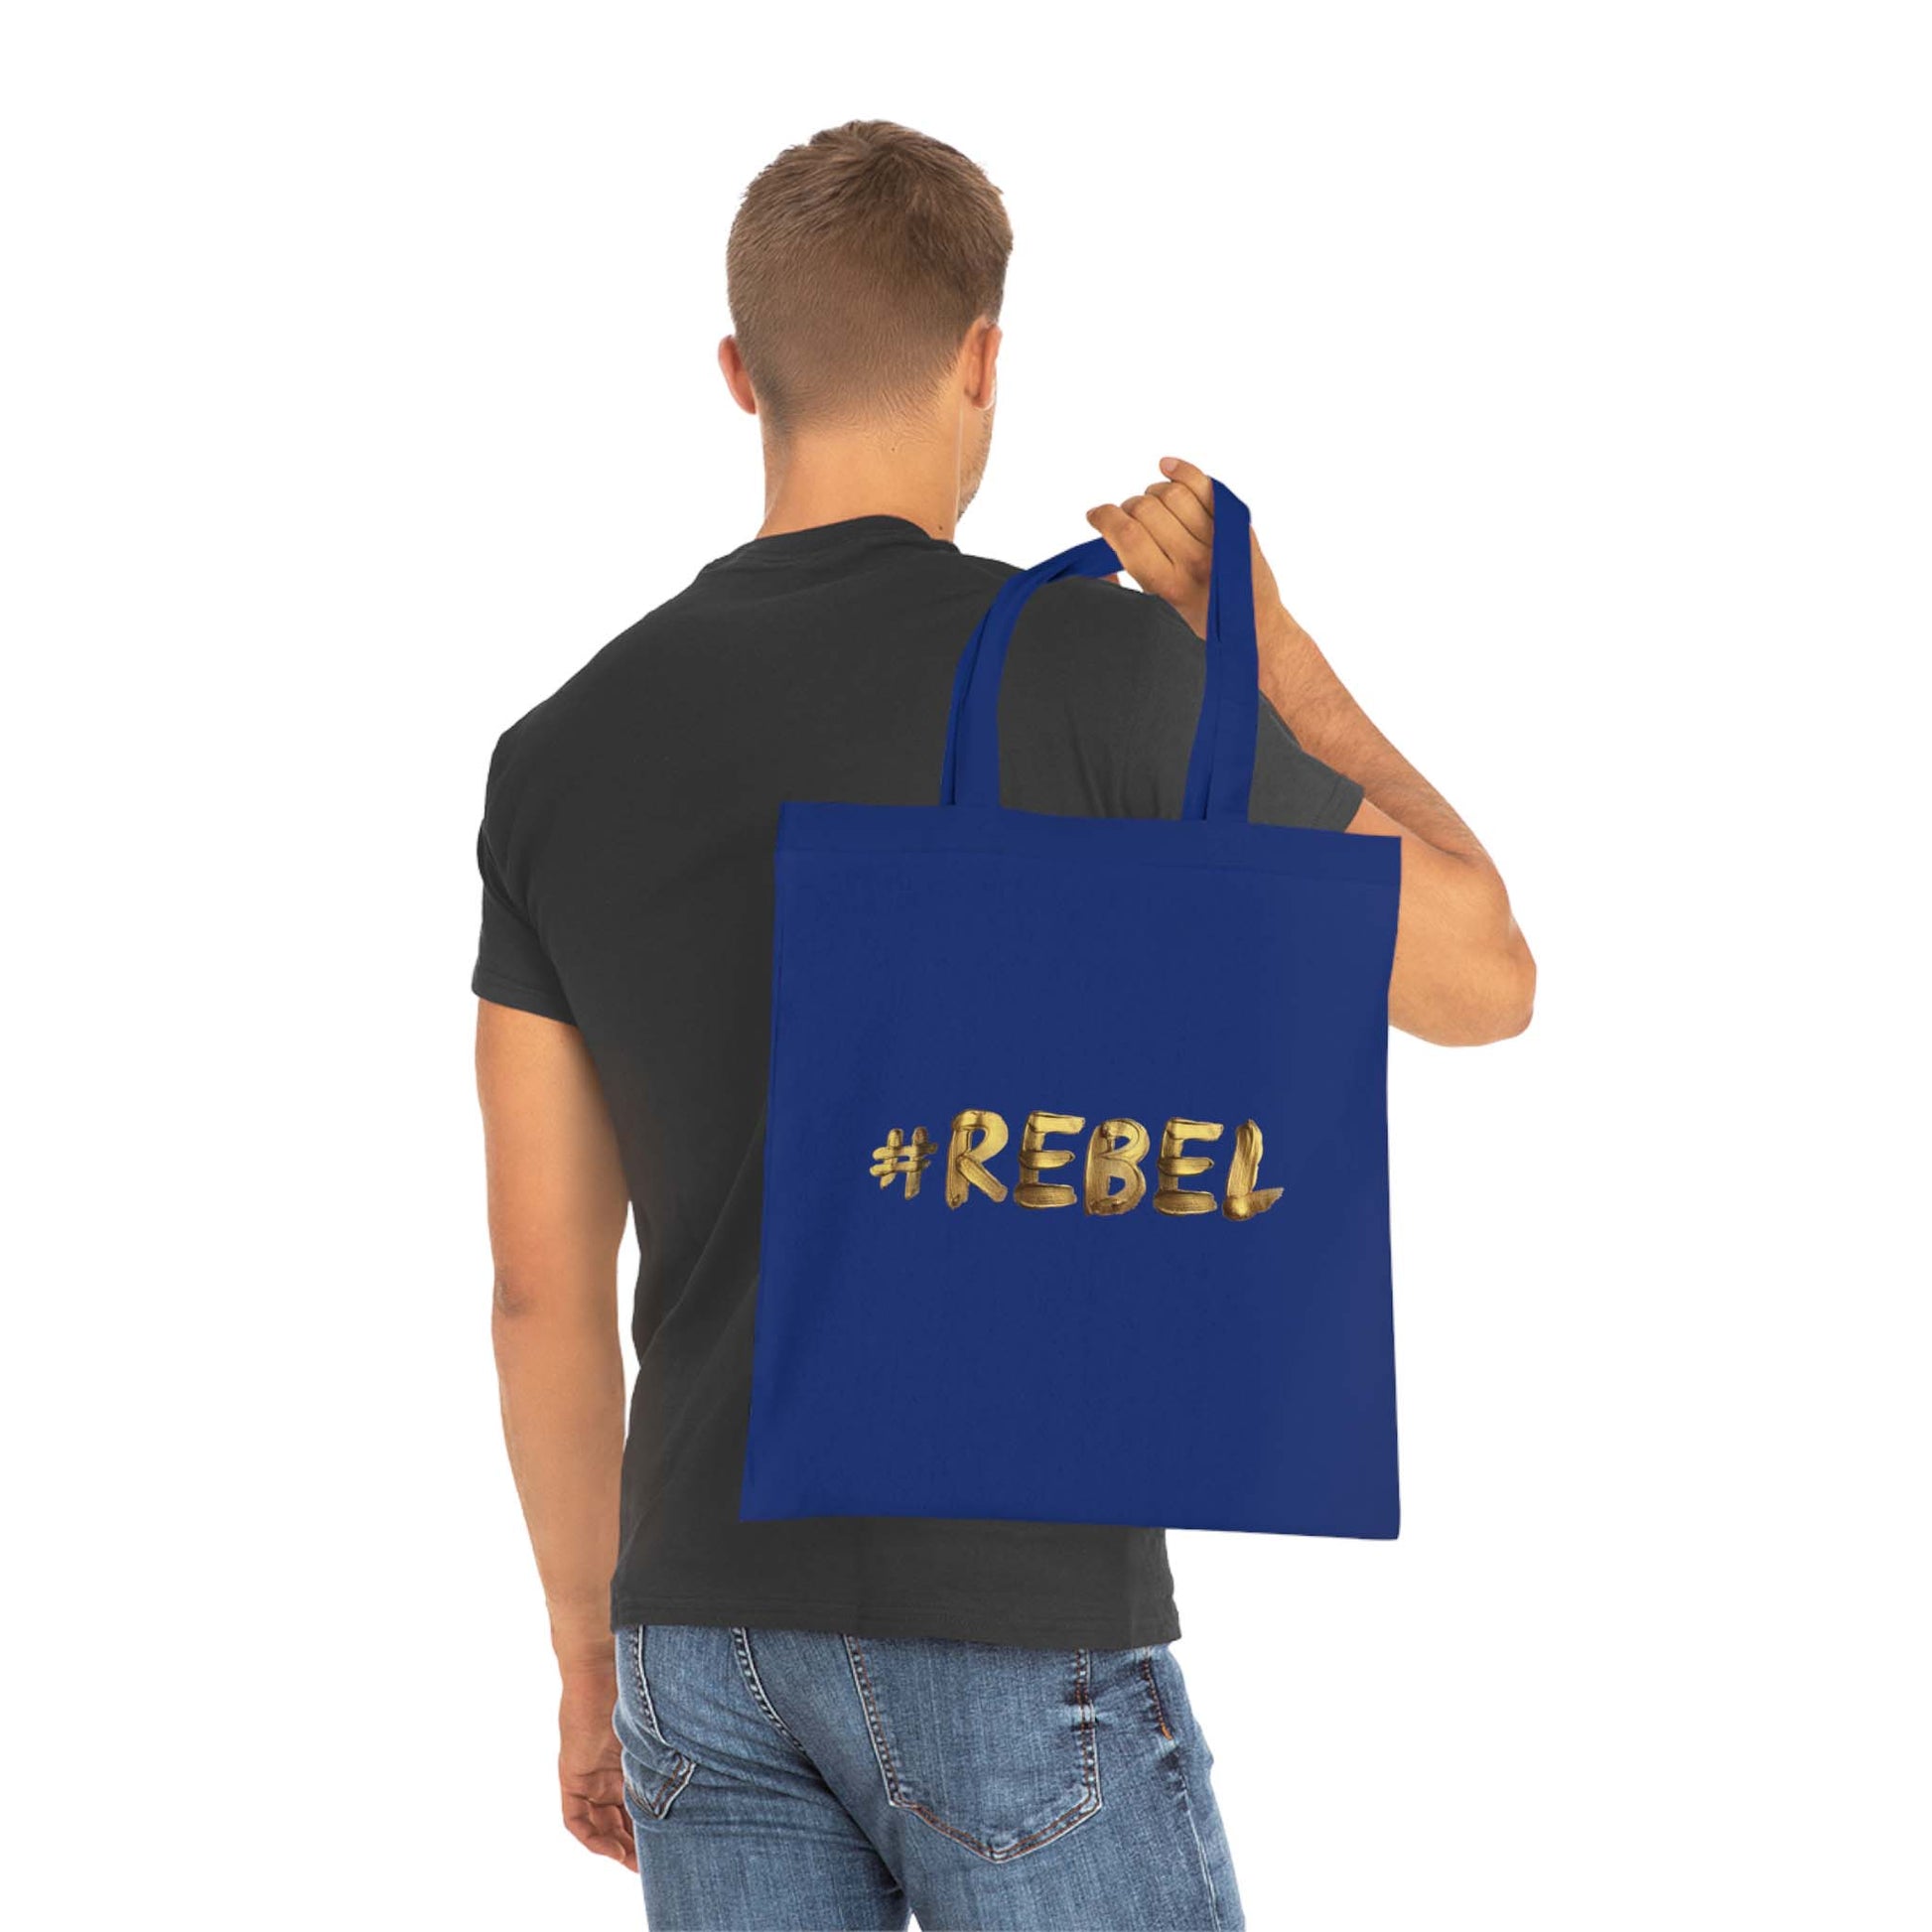 Rebels attention! This shopping bag is for you if you wanna make a statement that you are a #REBEL! Navy blue tote bag for rebels!